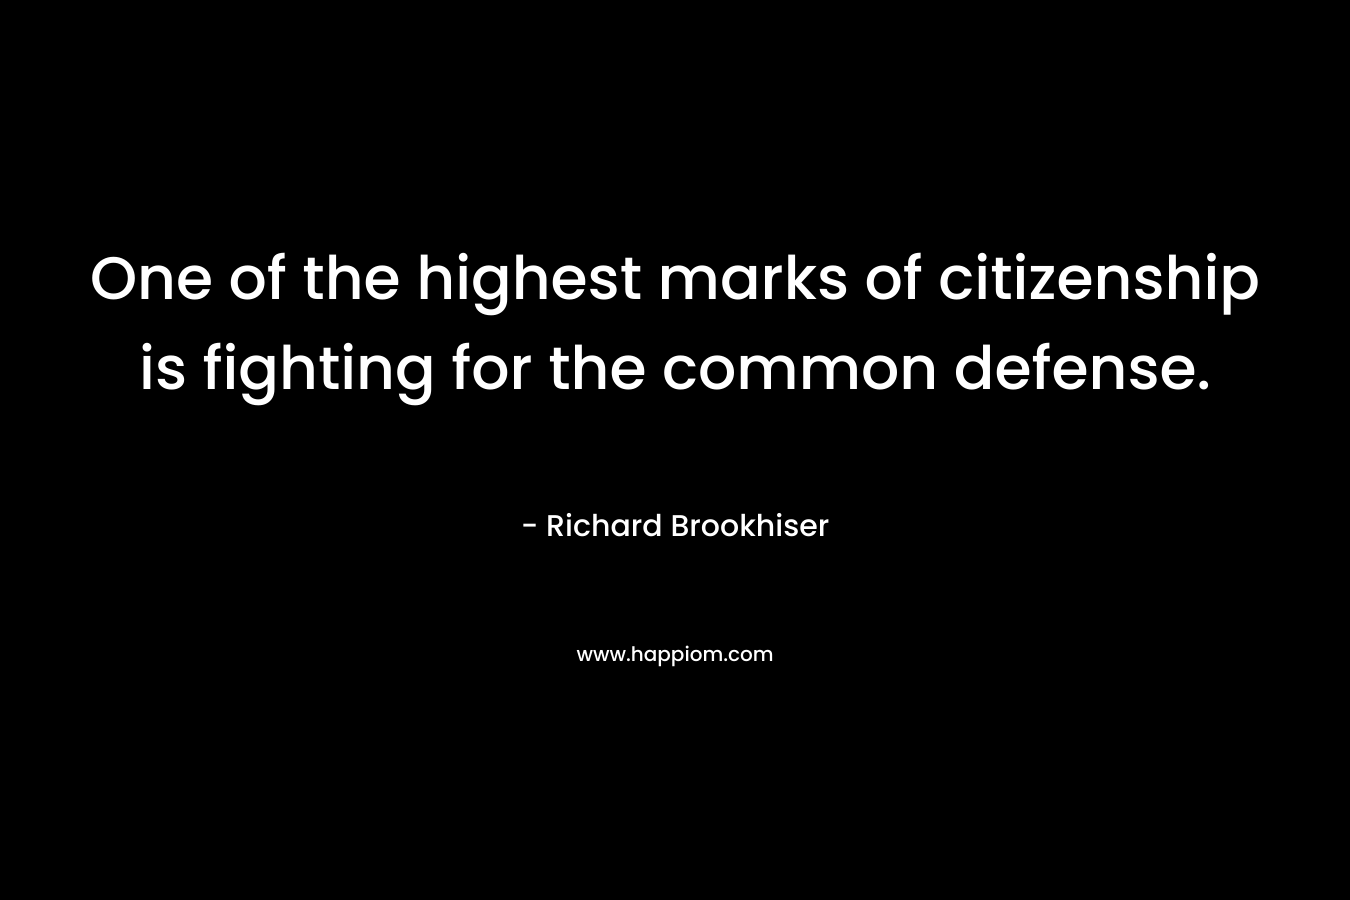 One of the highest marks of citizenship is fighting for the common defense. – Richard Brookhiser